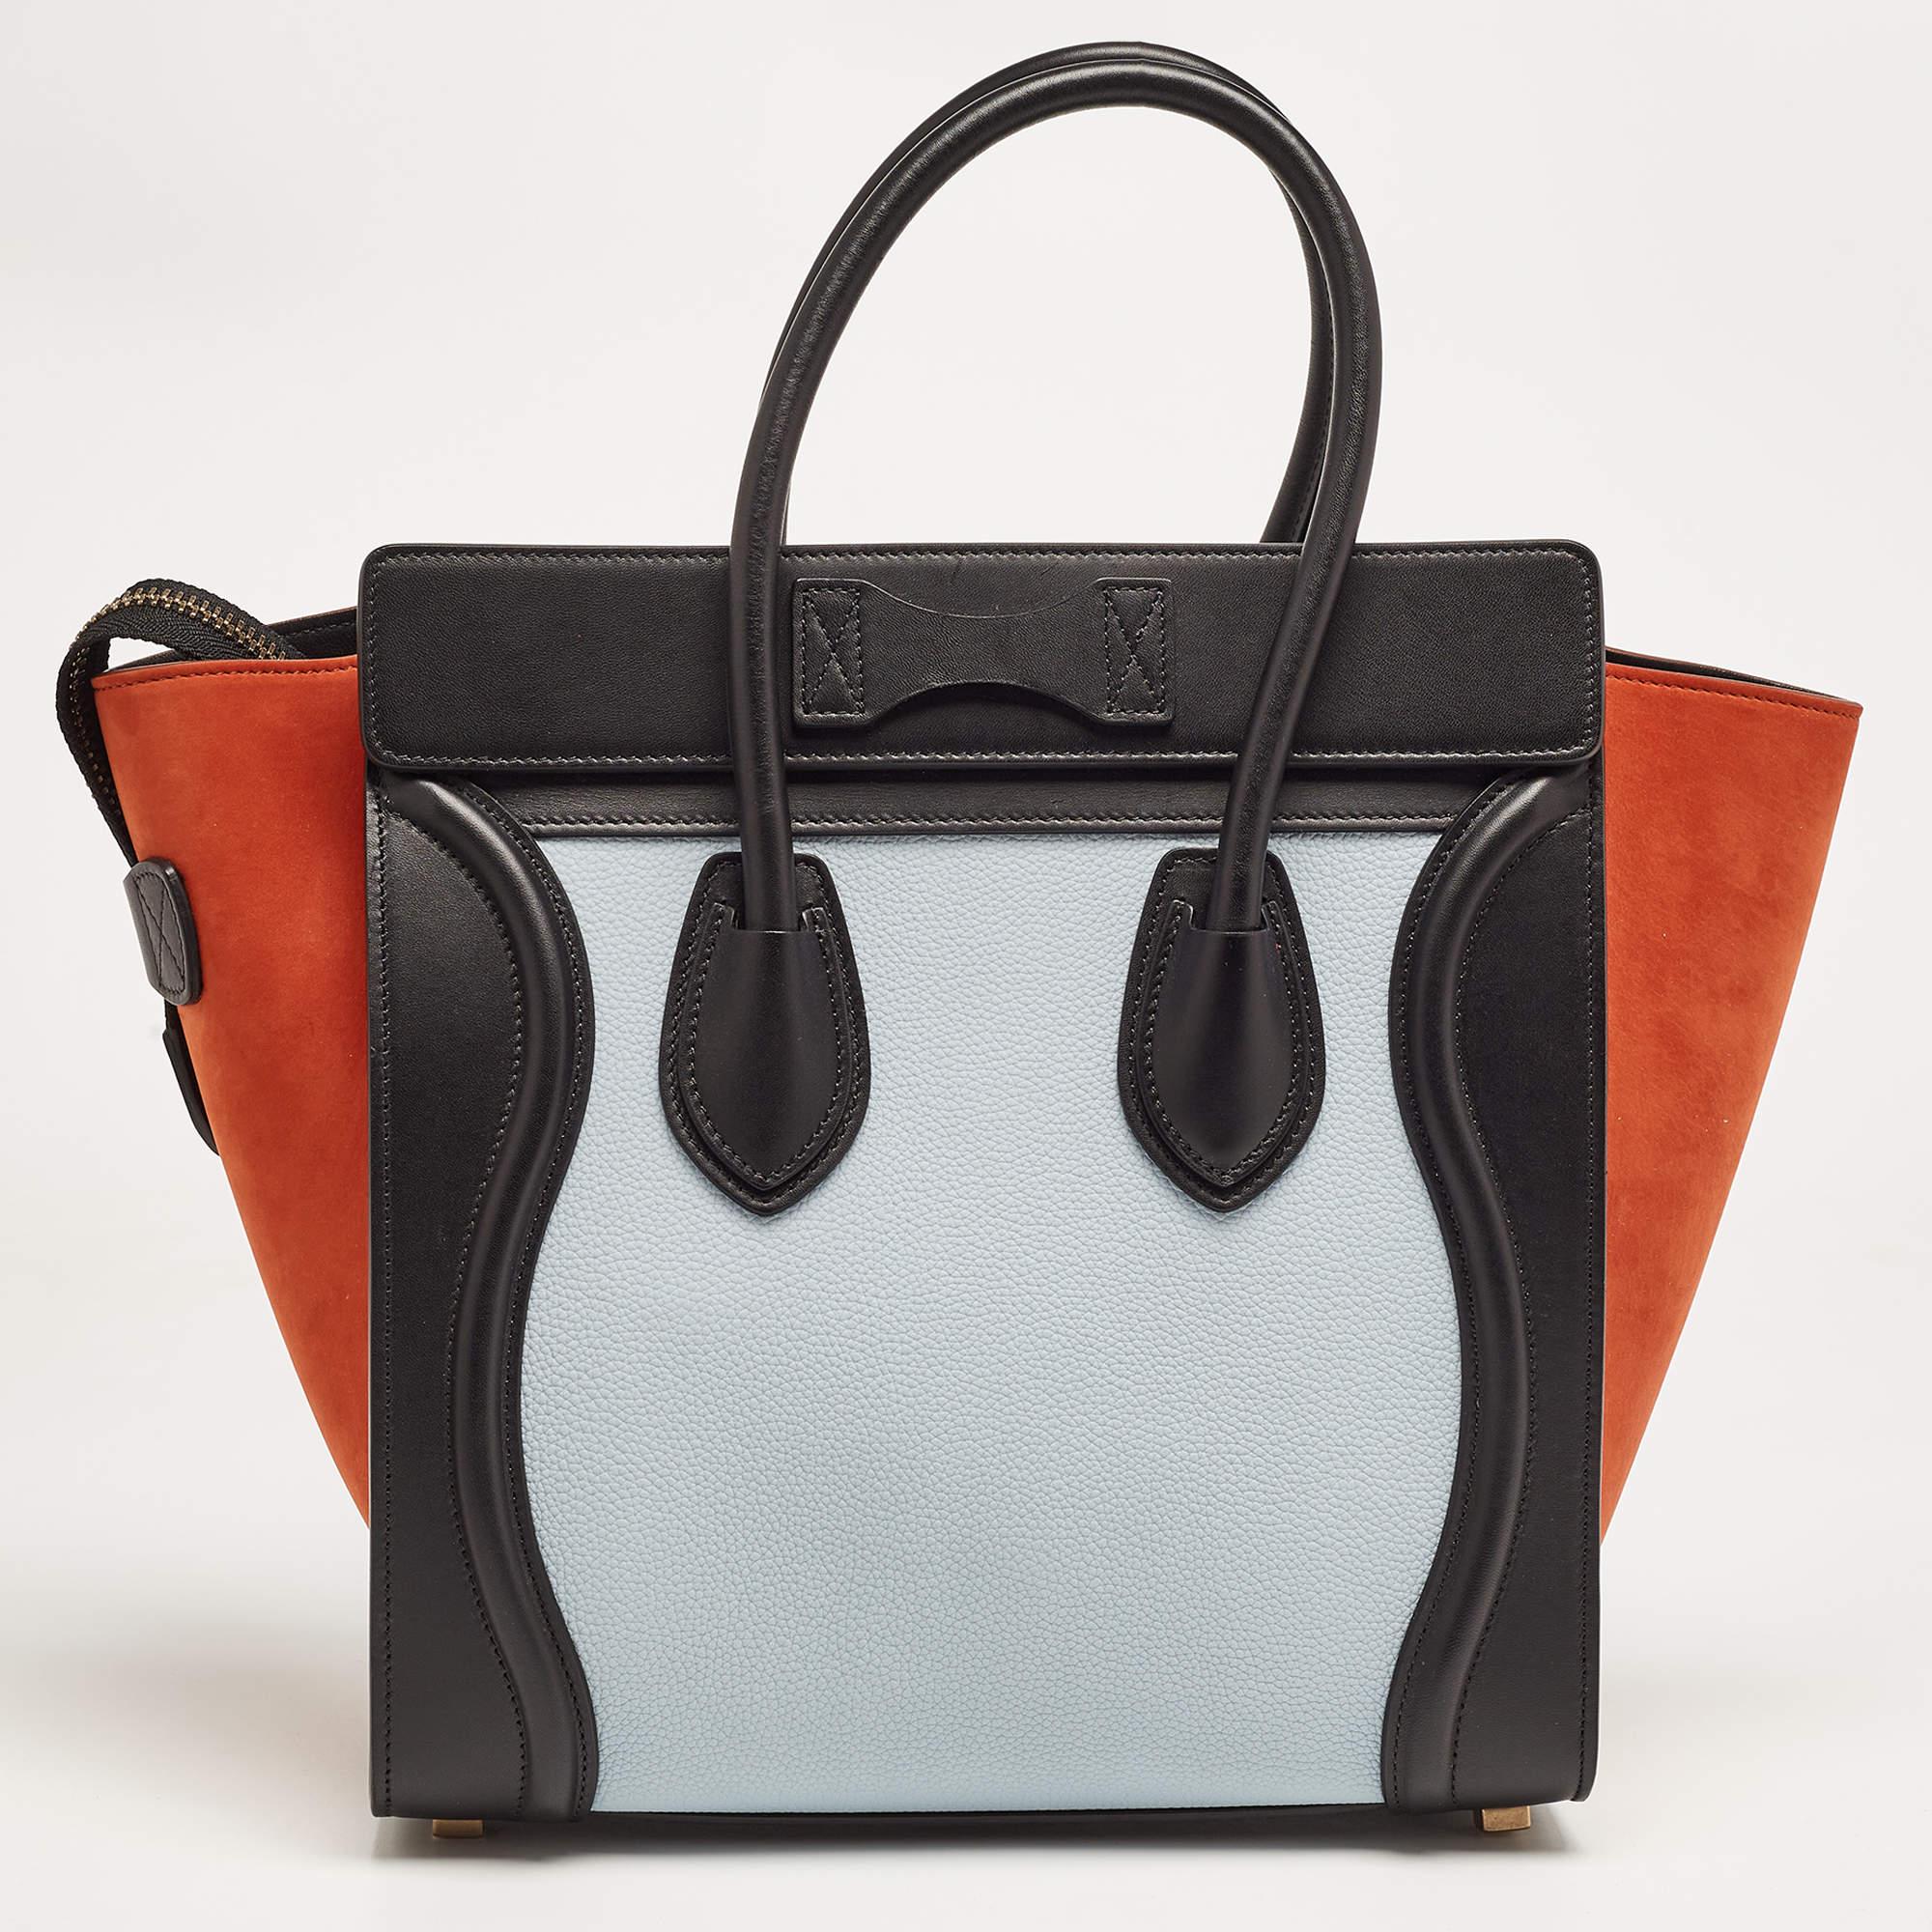 Striking a beautiful balance between essentiality and opulence, this tote from the House of Celine ensures that your handbag requirements are taken care of. It is equipped with practical features for all-day ease.

Includes: Info Booklet, Brand Tag

